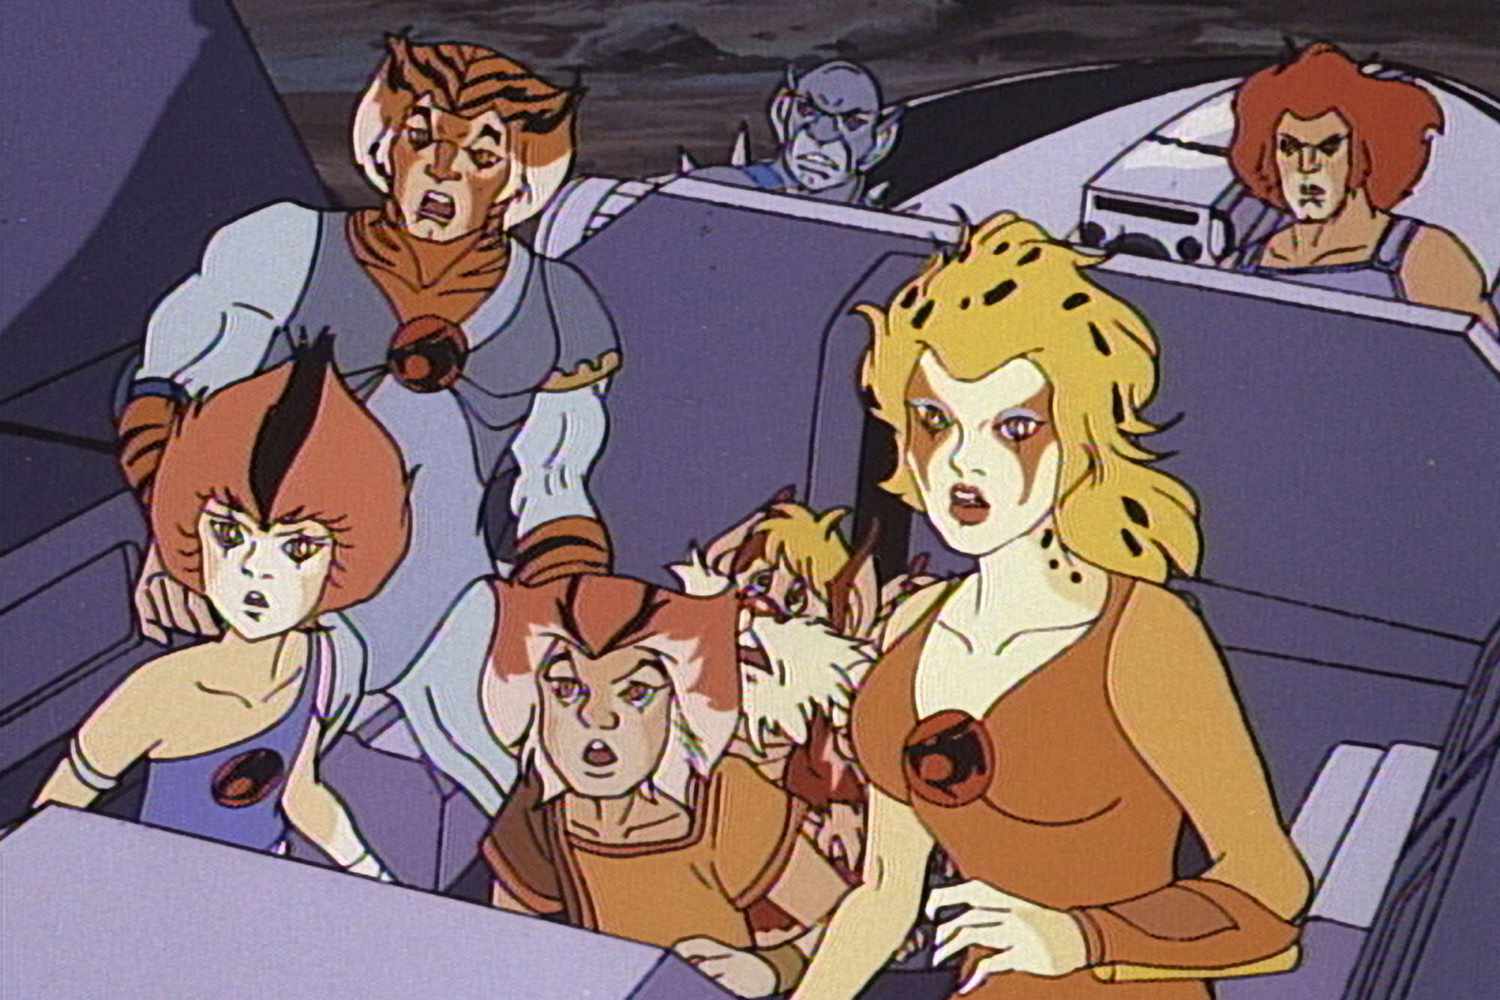 ThunderCats first aired in 1985 and ran for four seasons before ending in 1...